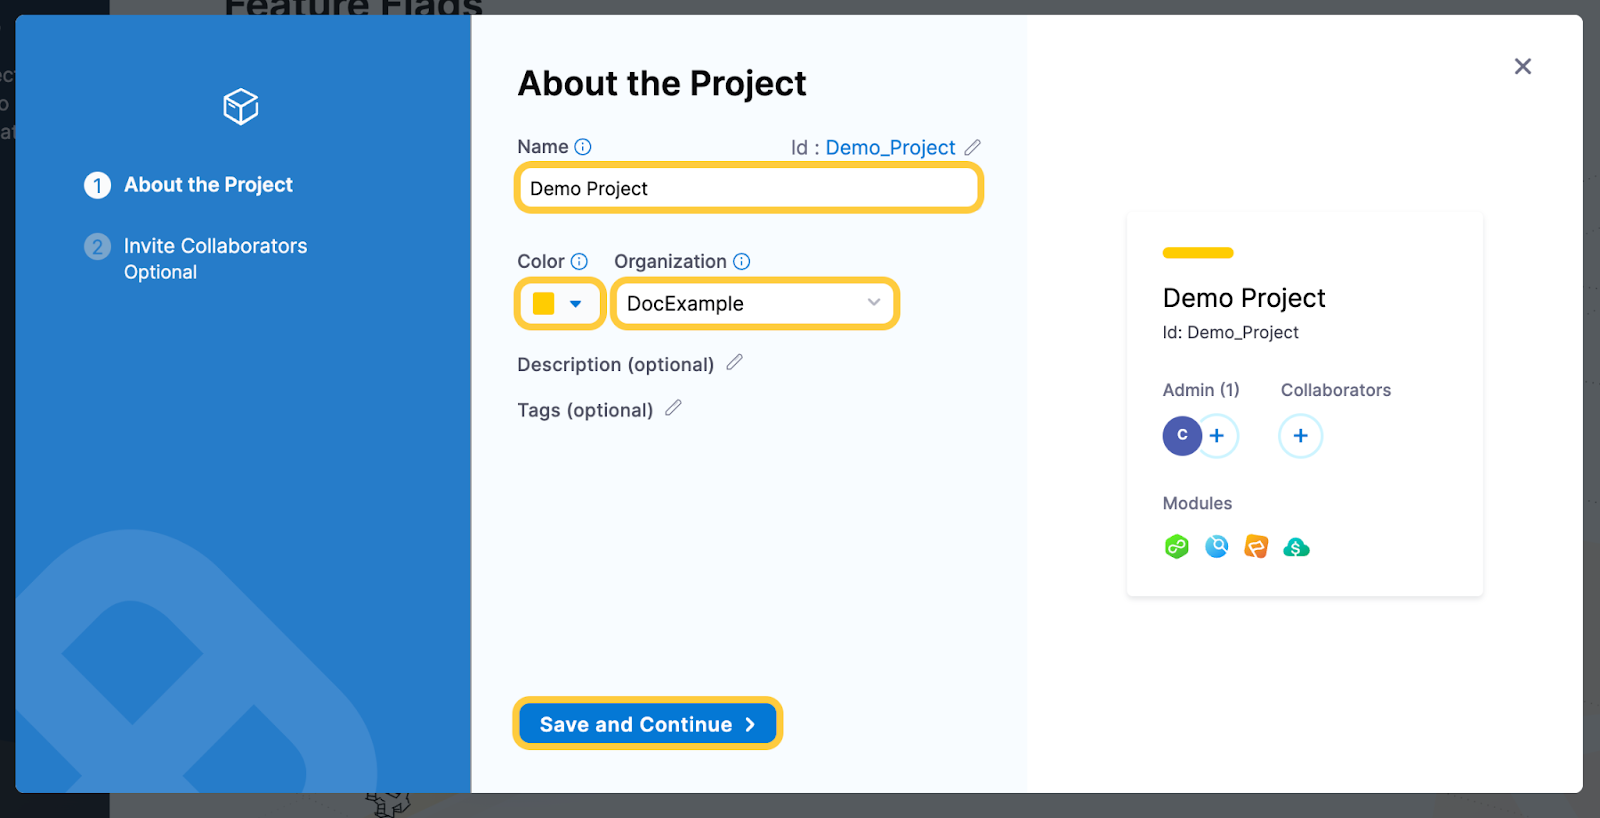 A screenshot of the About the Project form.